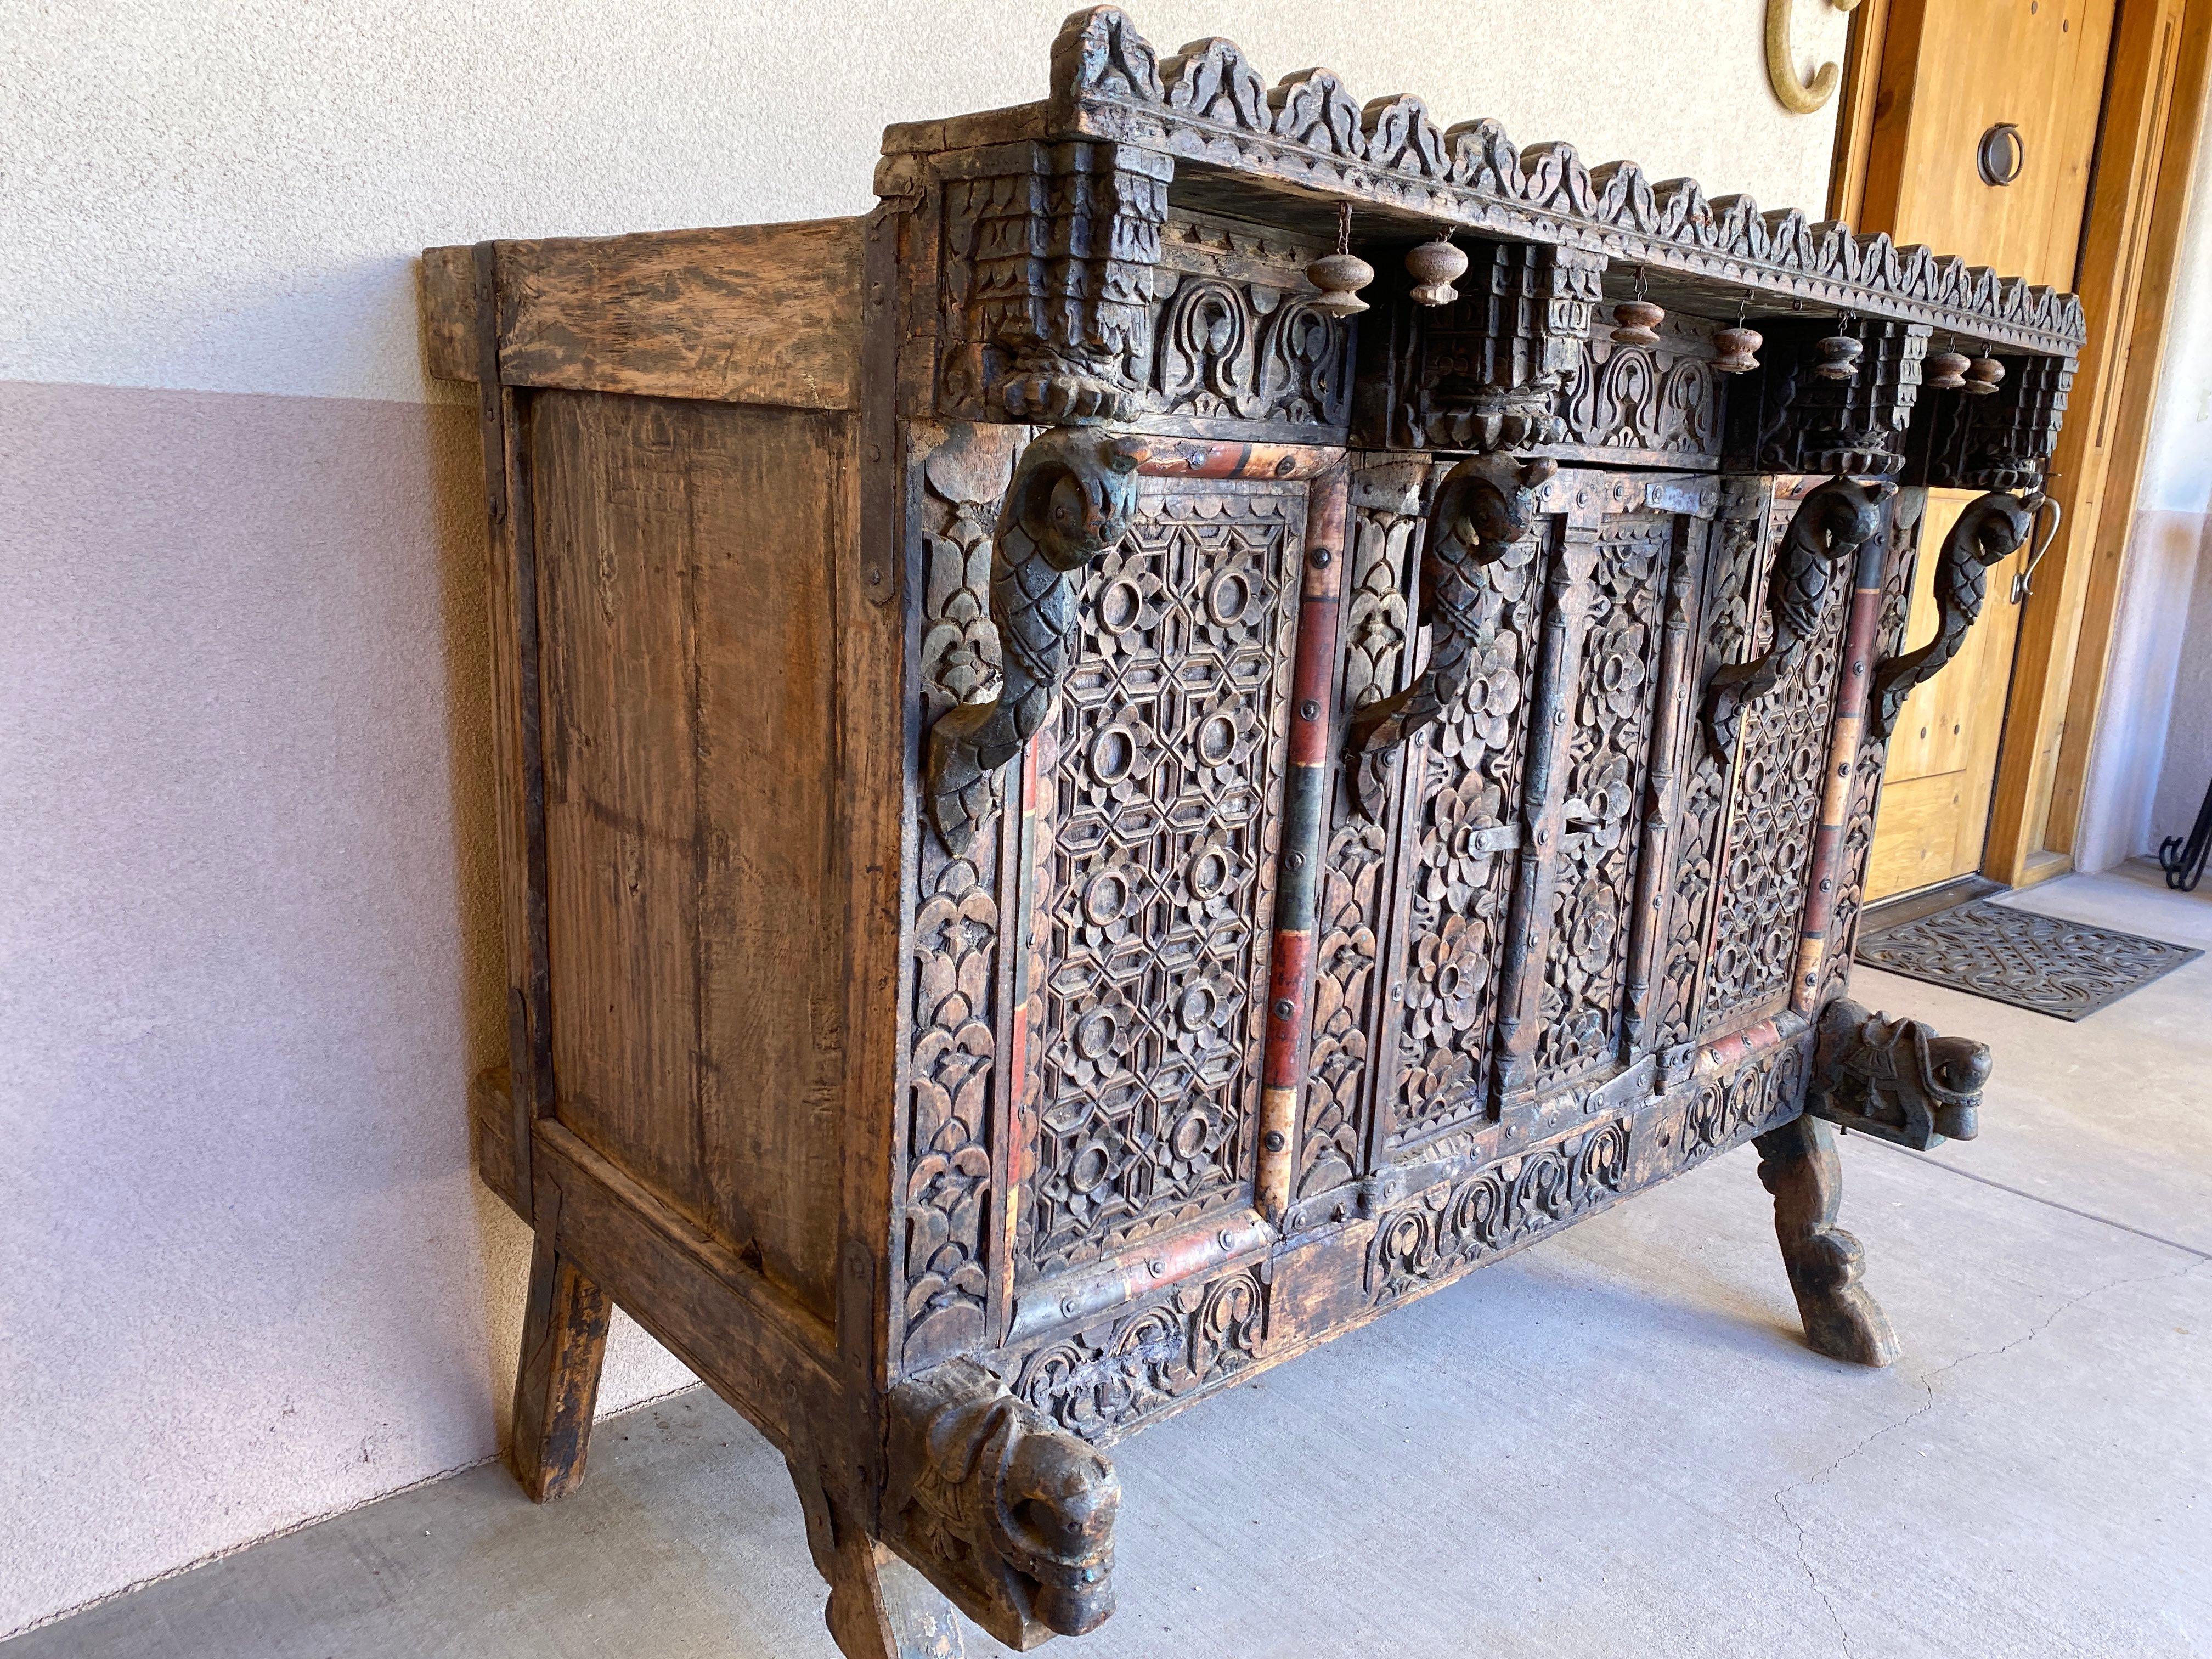 A beautiful accent piece, full of character, usable as a storage chest, side board, or simply for display, 19th century. Two-doors at front with original metal clasp. Panels to side of doors with decorative trim in blond, black and red stained wood.